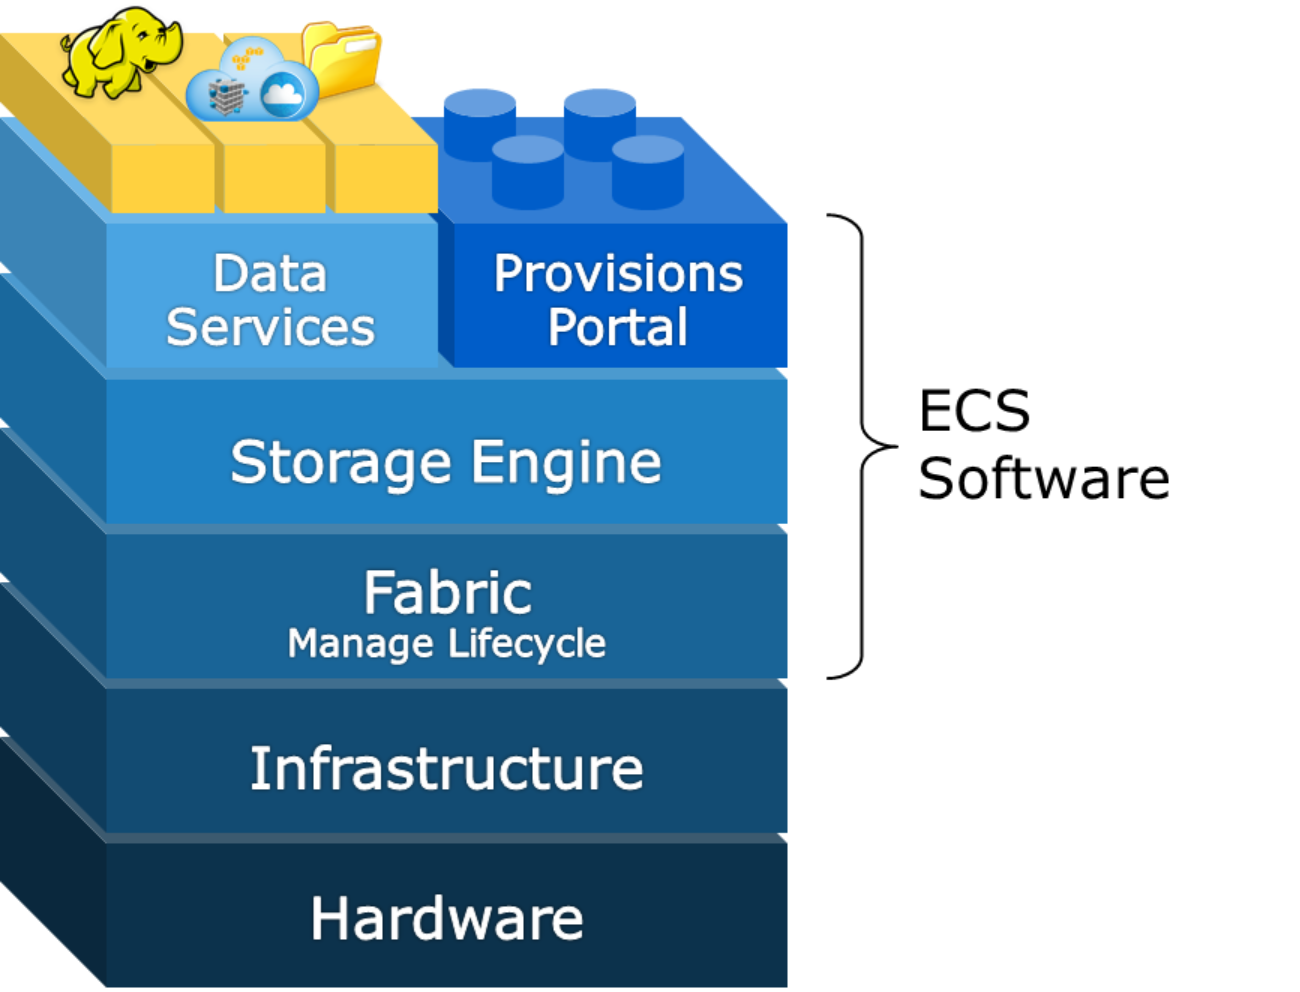 The Hardware layer is on the bottom. The Infrastructure layer is on top of it.  The ECS software is on top of the Infrastructure layer with Fabric, Storage Engine, Data Services and the Provisioning Portal layers above it.